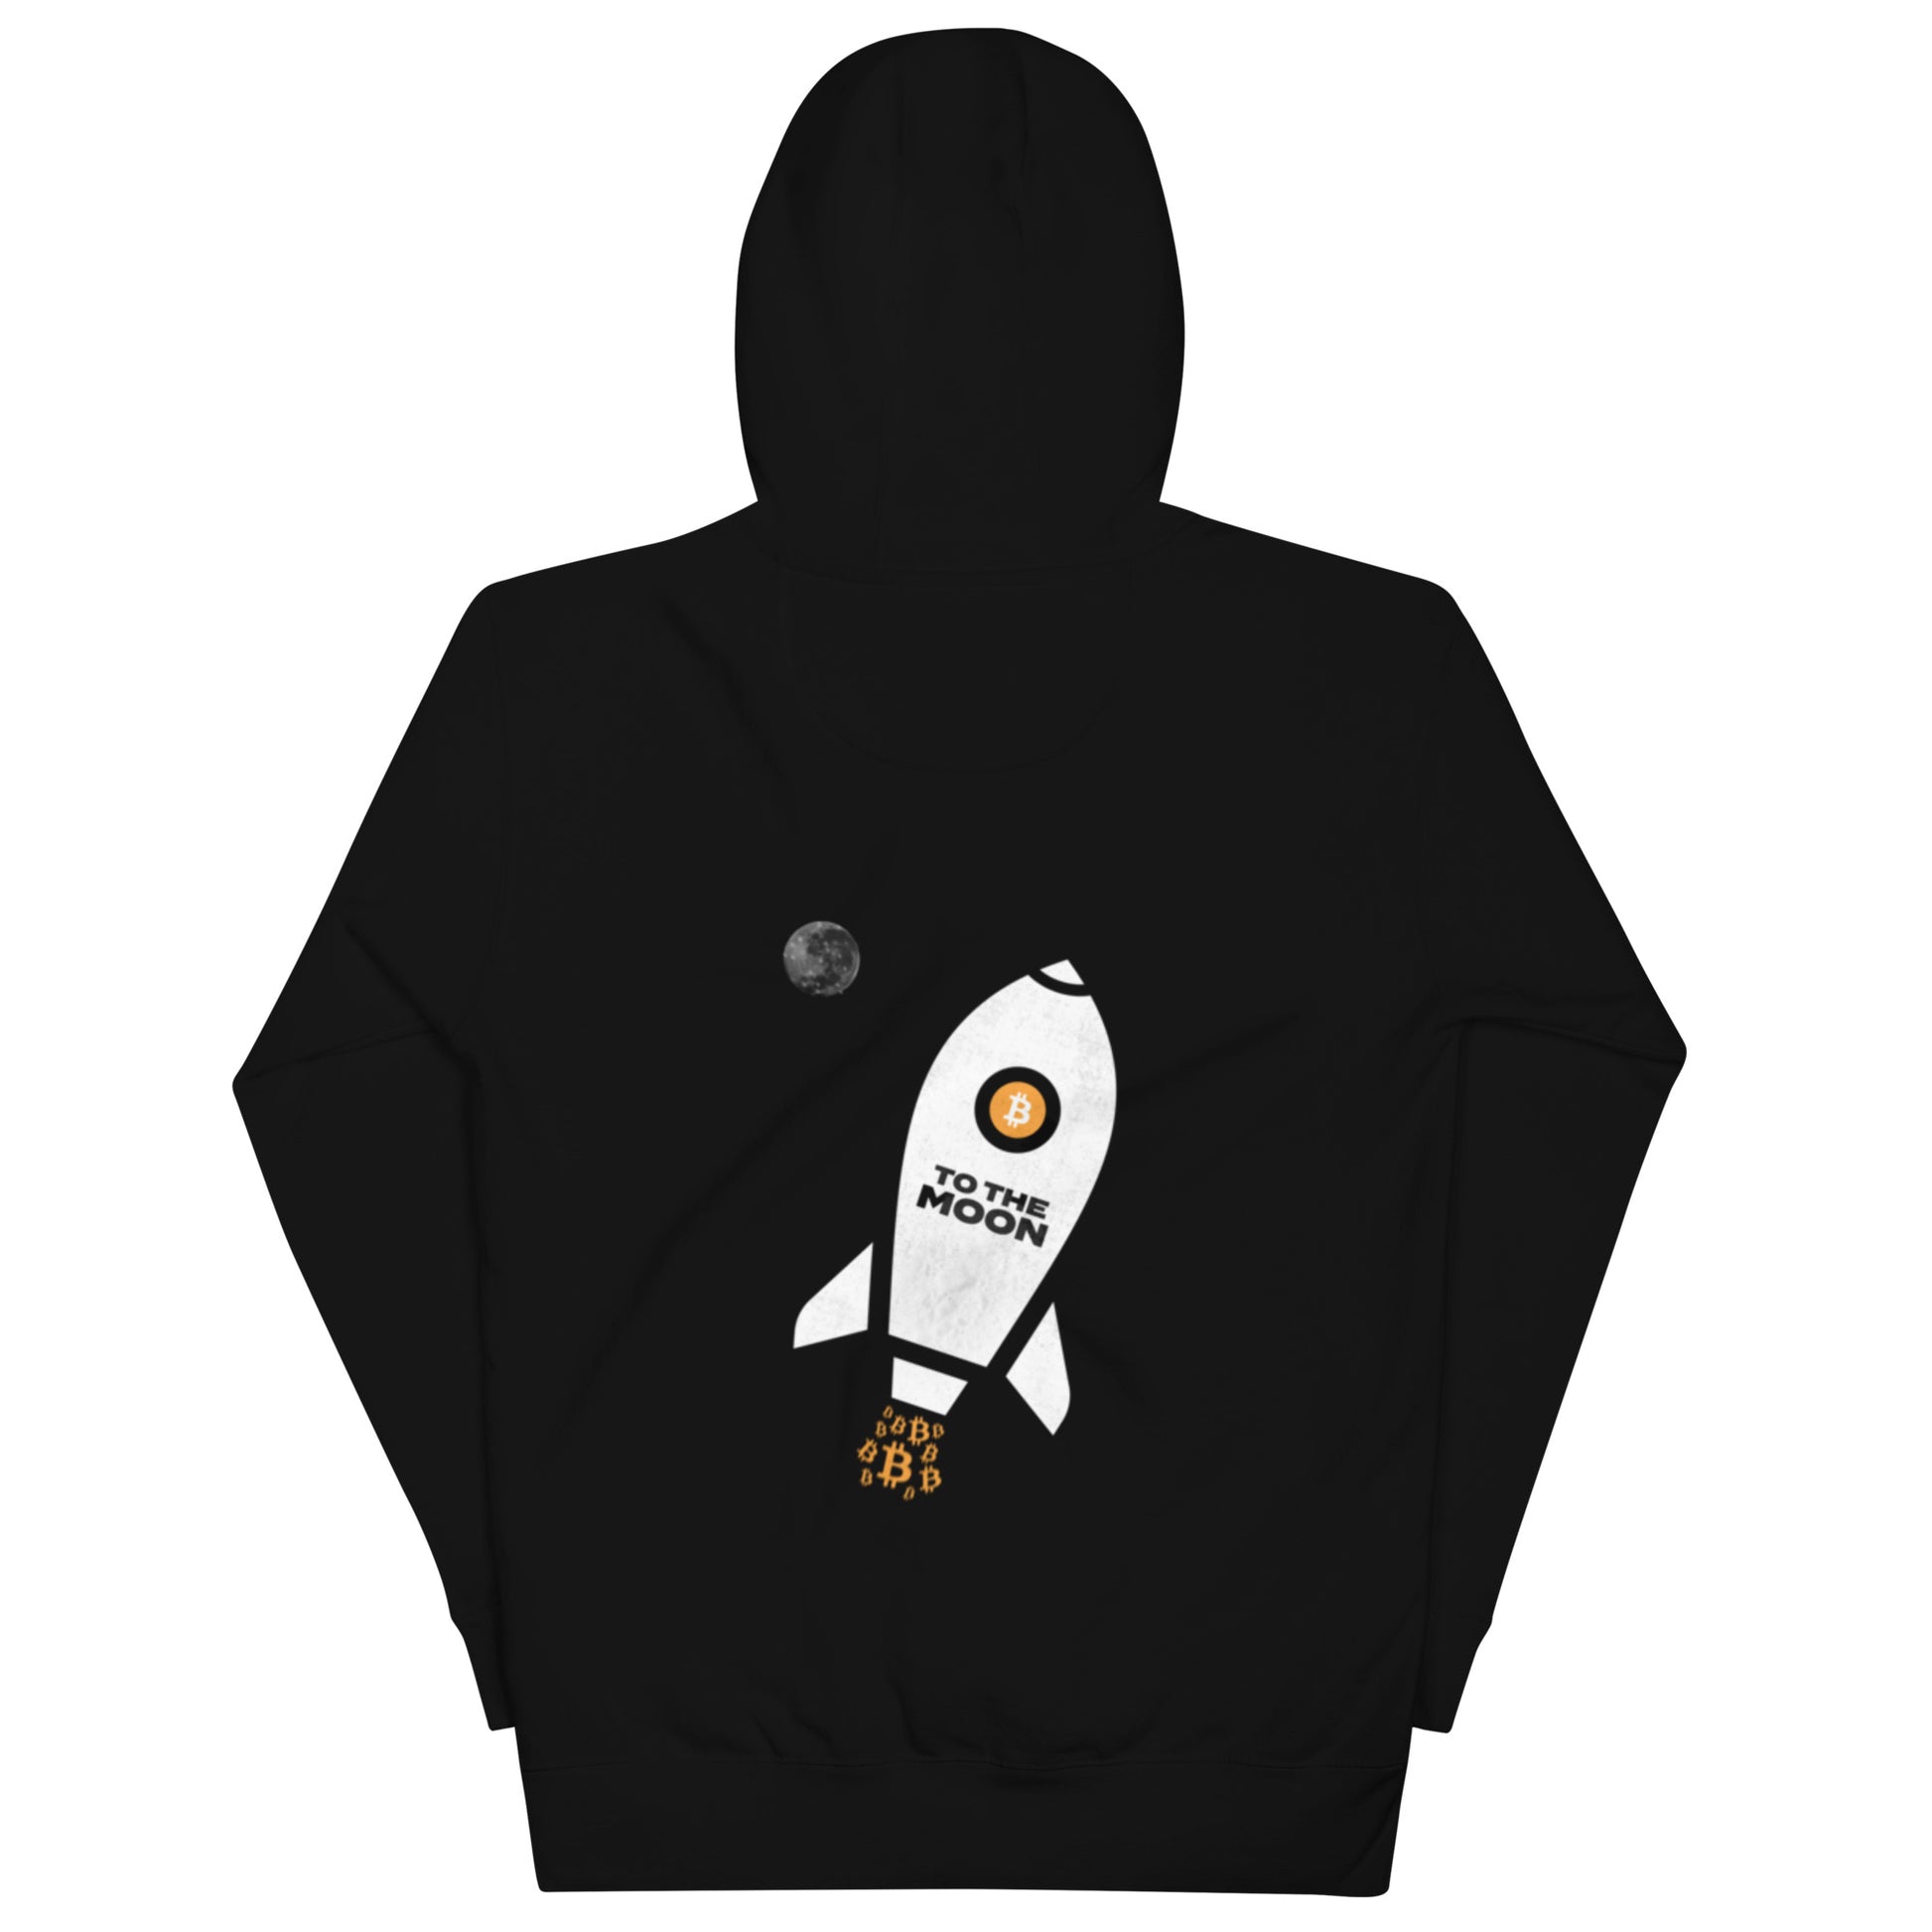 Bitcoin To The Moon Hoodie v01 - Hodlers Crypto Merch Brand